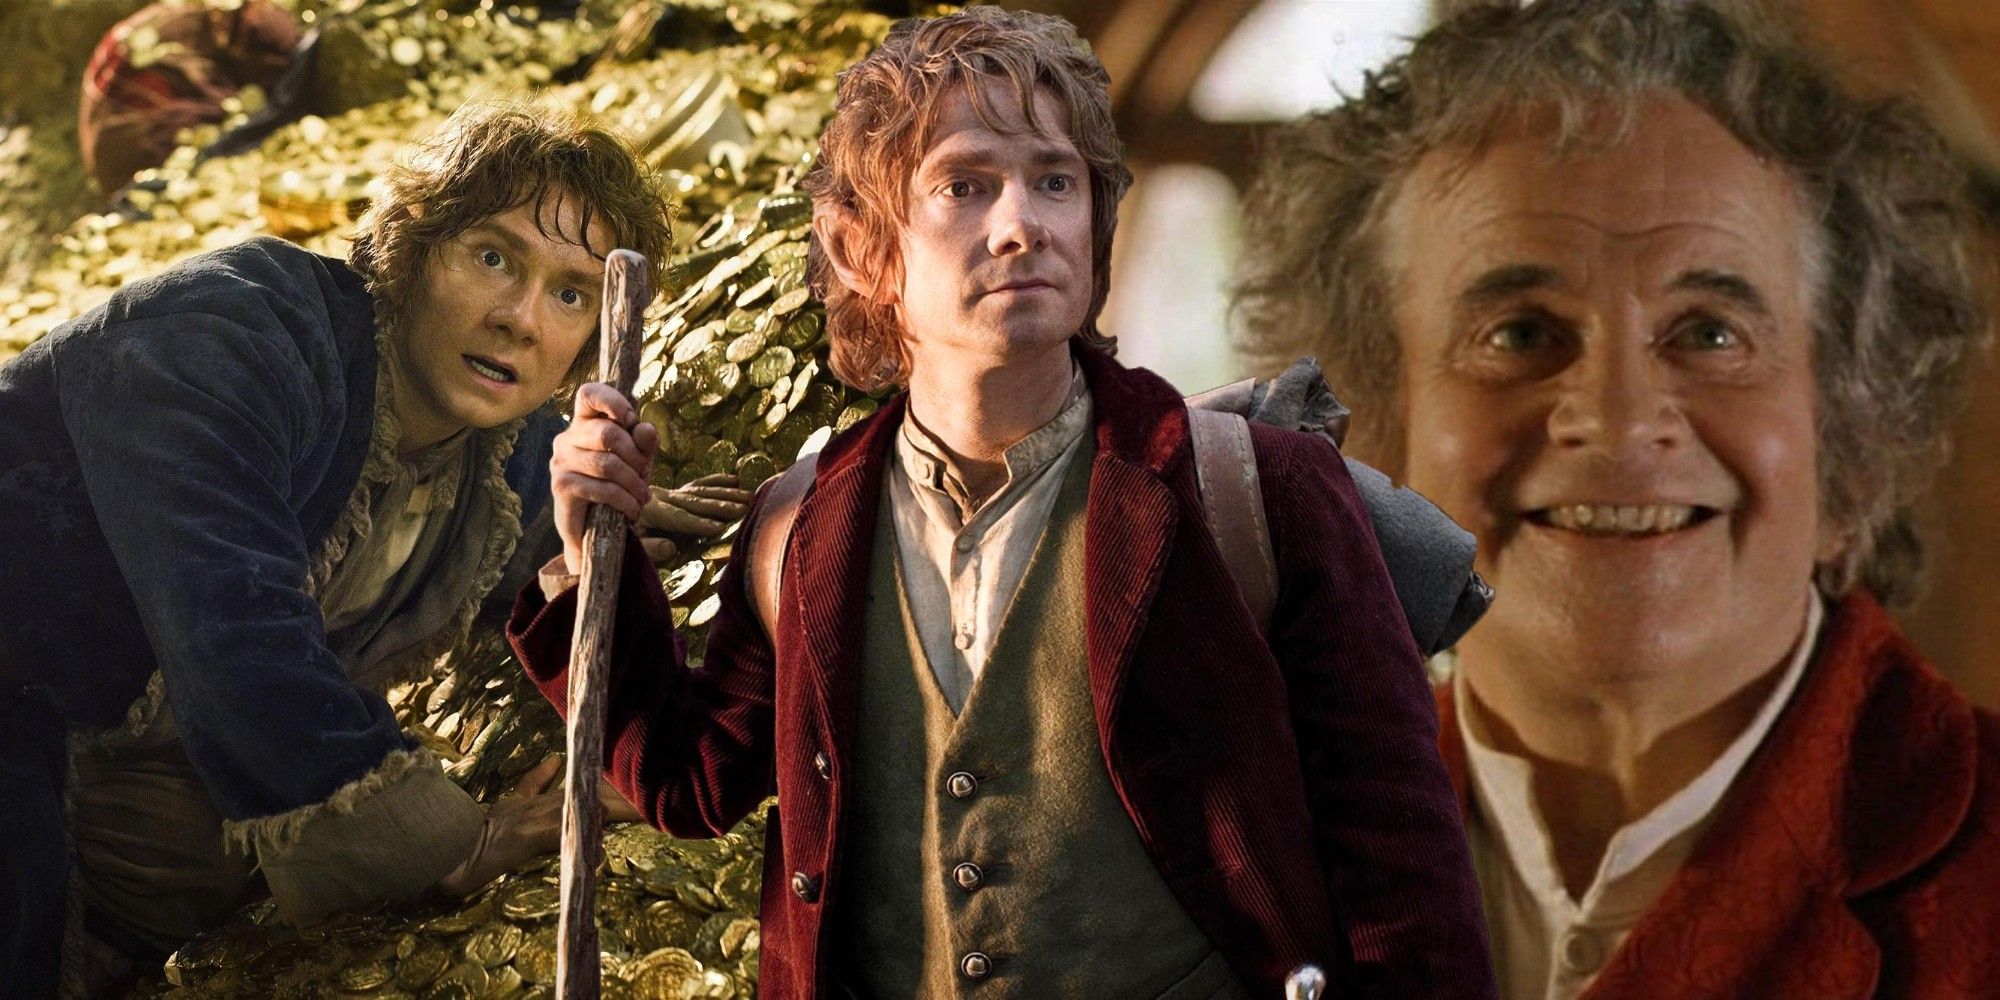 Split image of Martin Freeman and Ian Holm as Bilbo Baggins in The Lord of the Rings and Hobbit movies